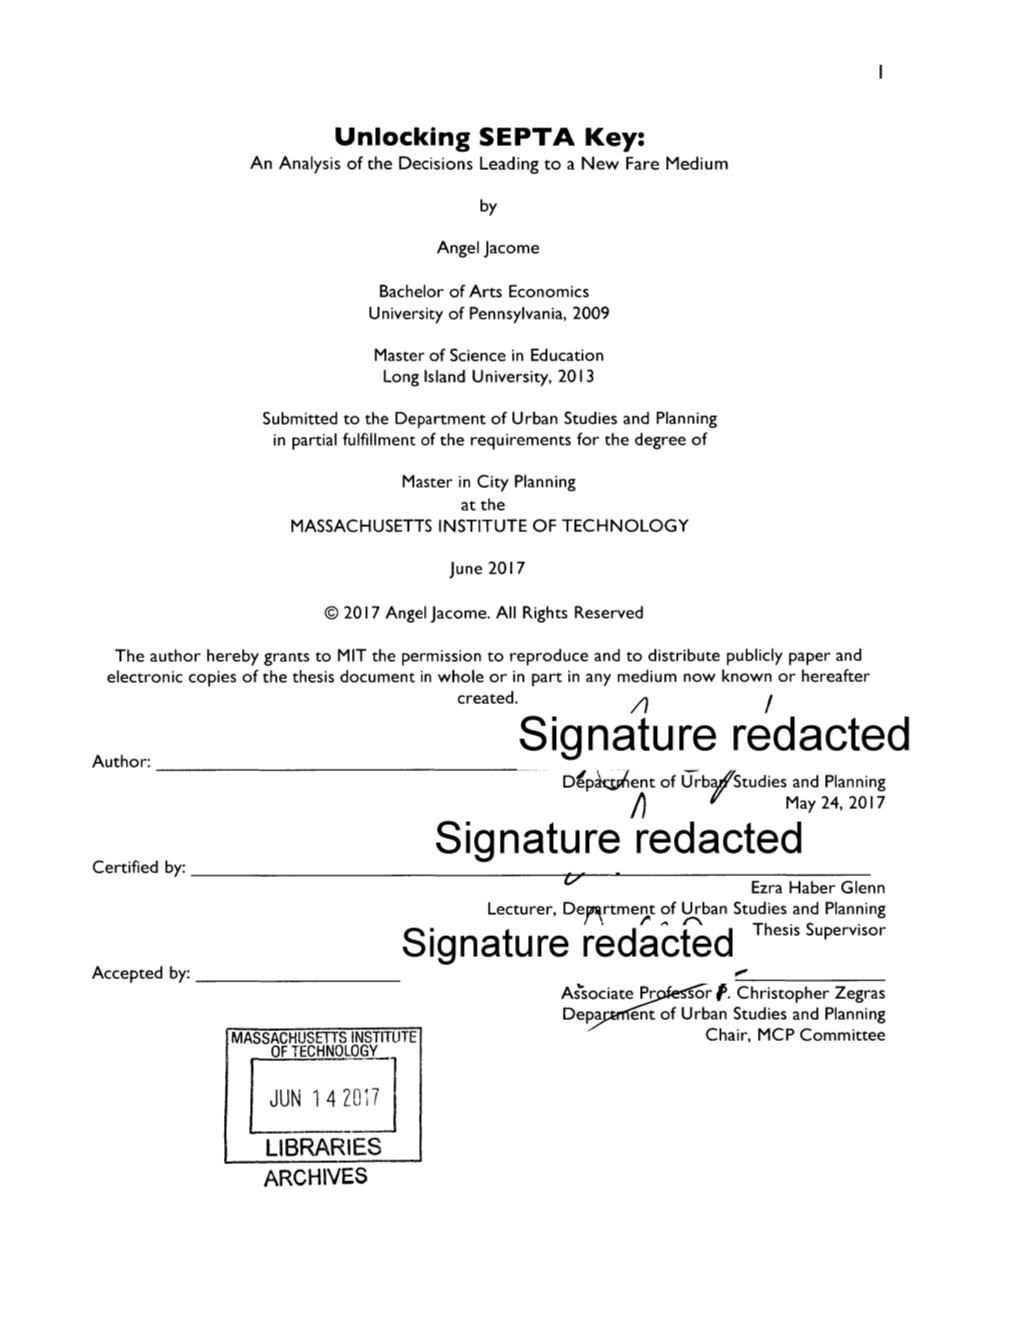 Signature Redacted Thesis Supervisor Accepted By: As'sociate Pr Orf